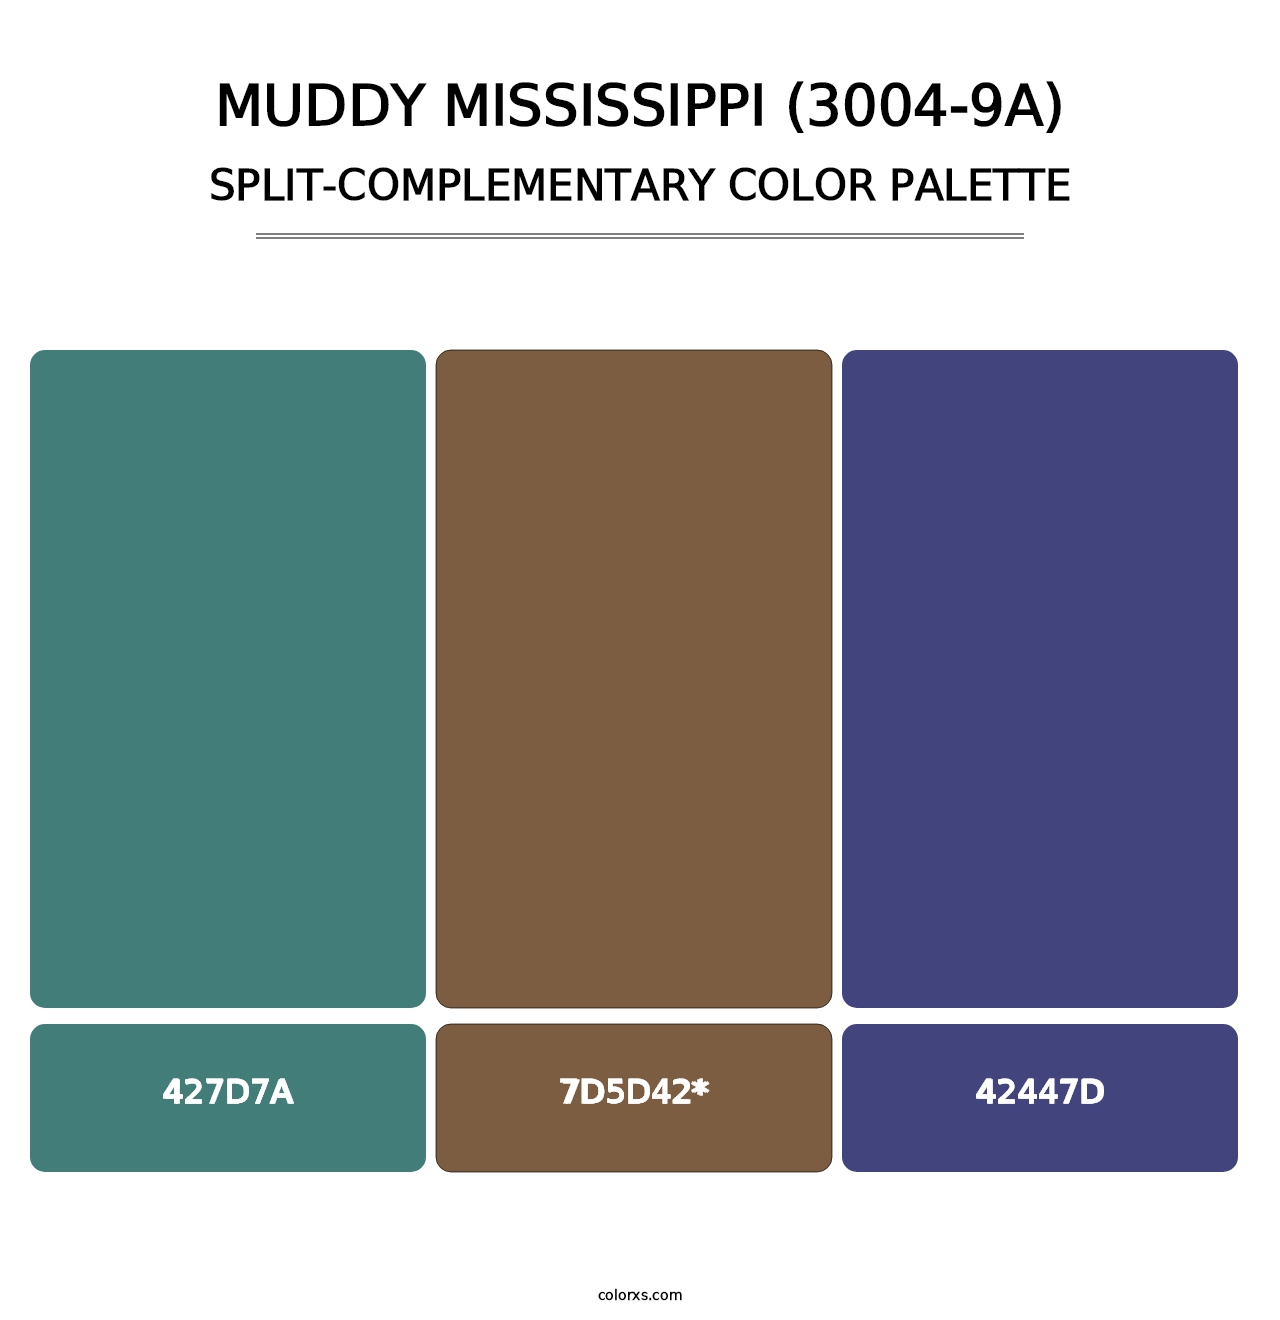 Muddy Mississippi (3004-9A) - Split-Complementary Color Palette